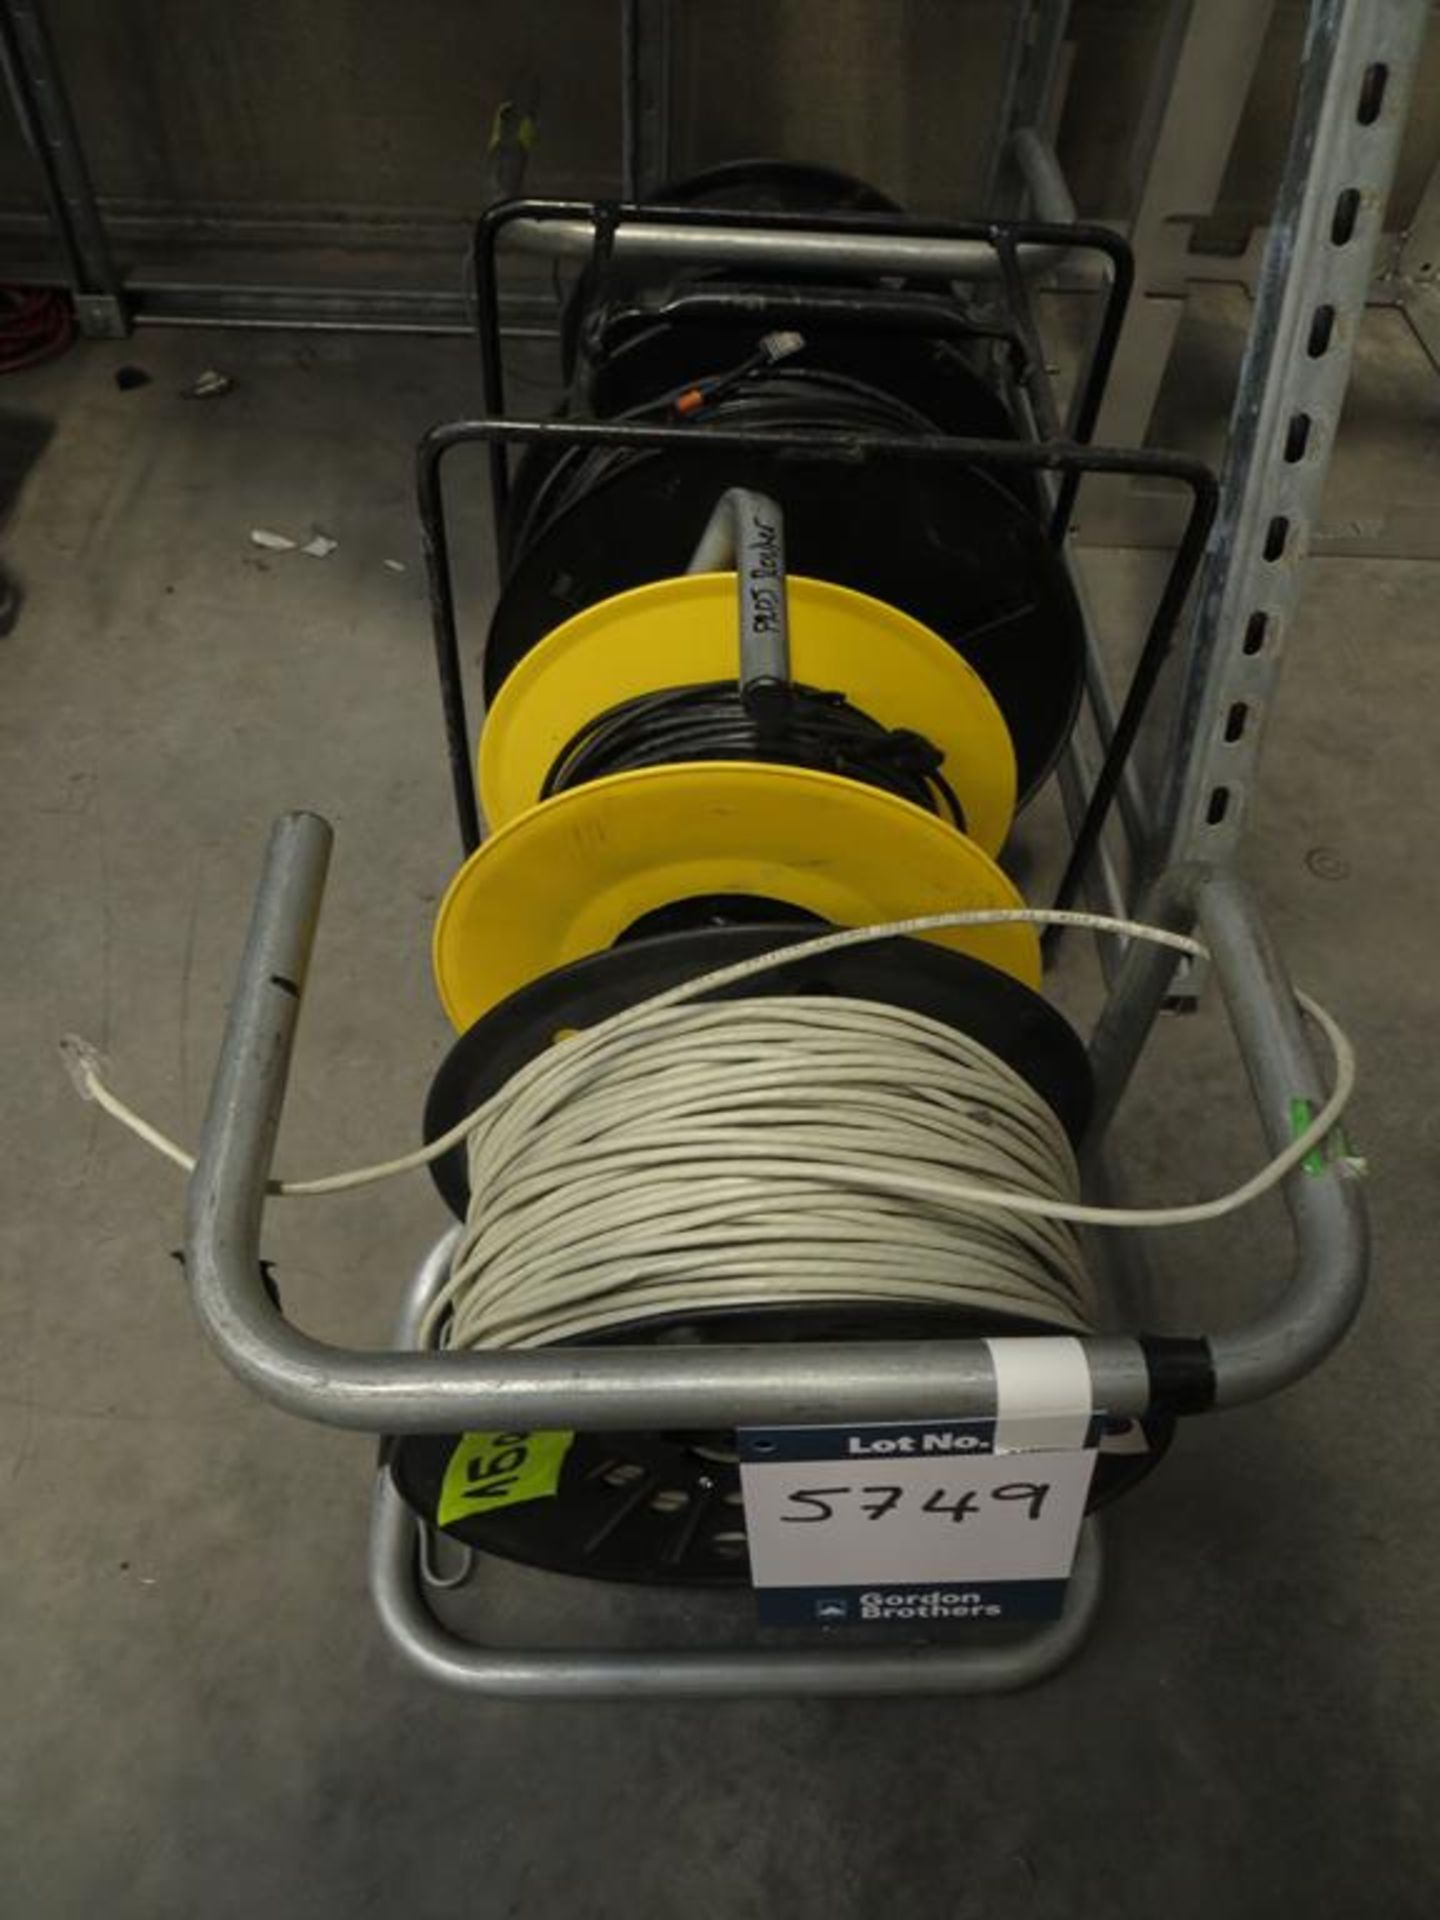 4x No. CAT5 cables on reel, various lengths: MCL C